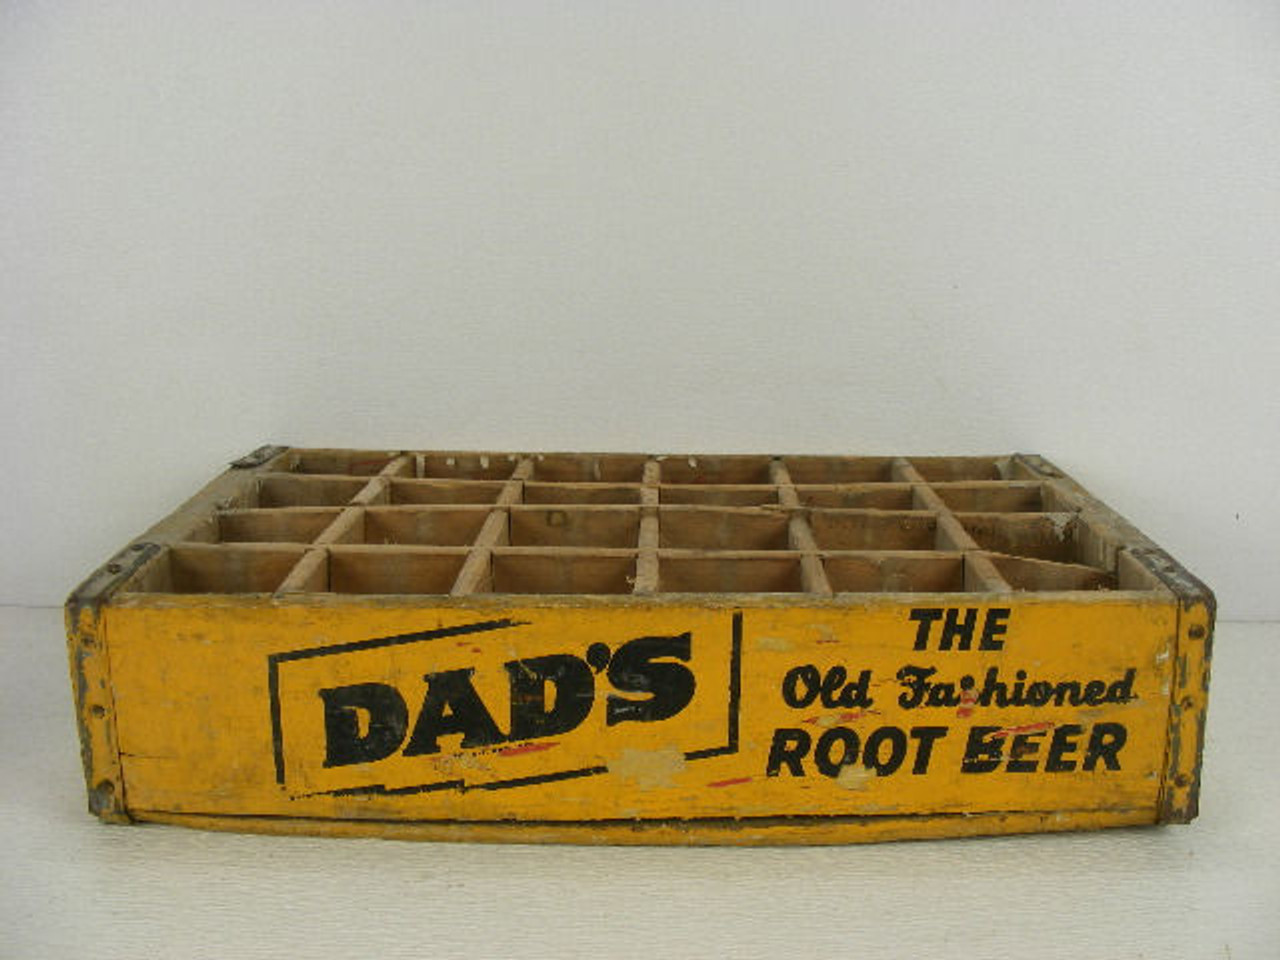 Wooden Crate for Dad's Beer